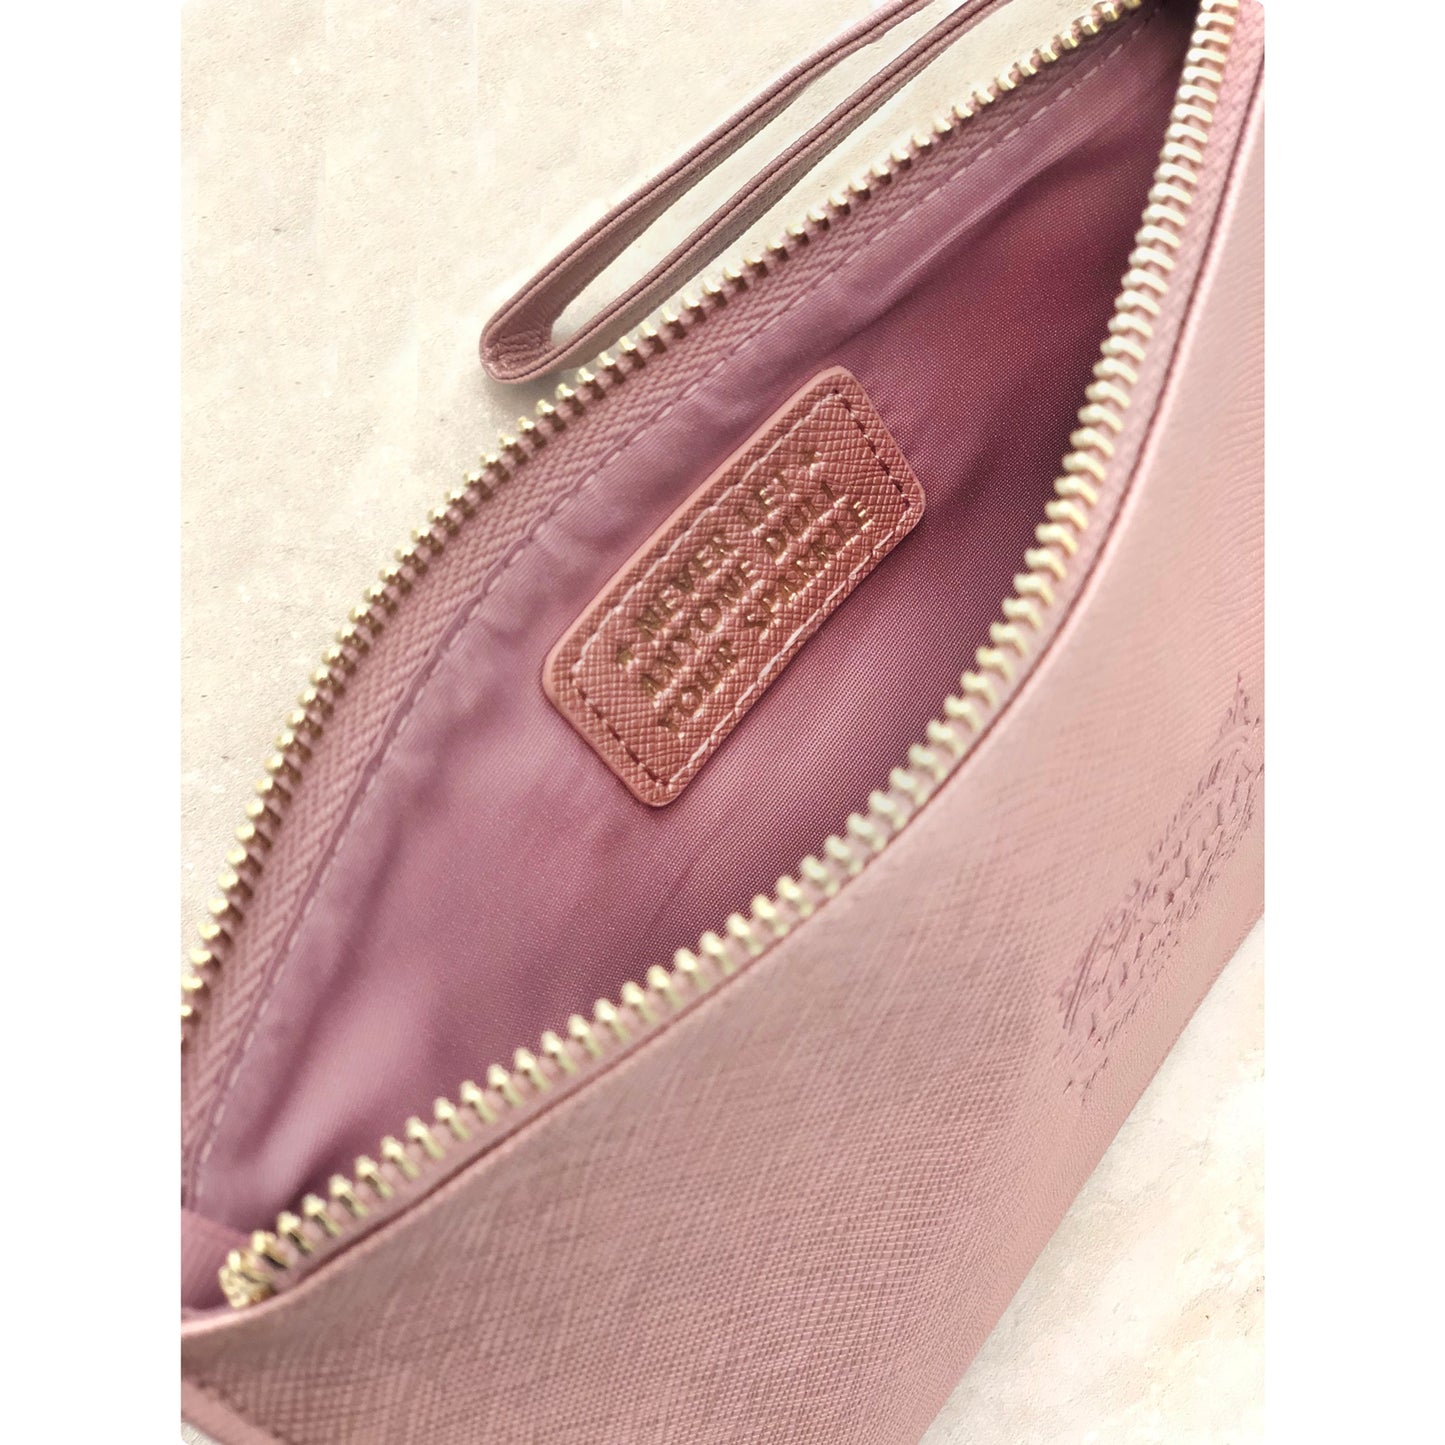 Clutch Bag With Handle & Embossed Text "Sharon"